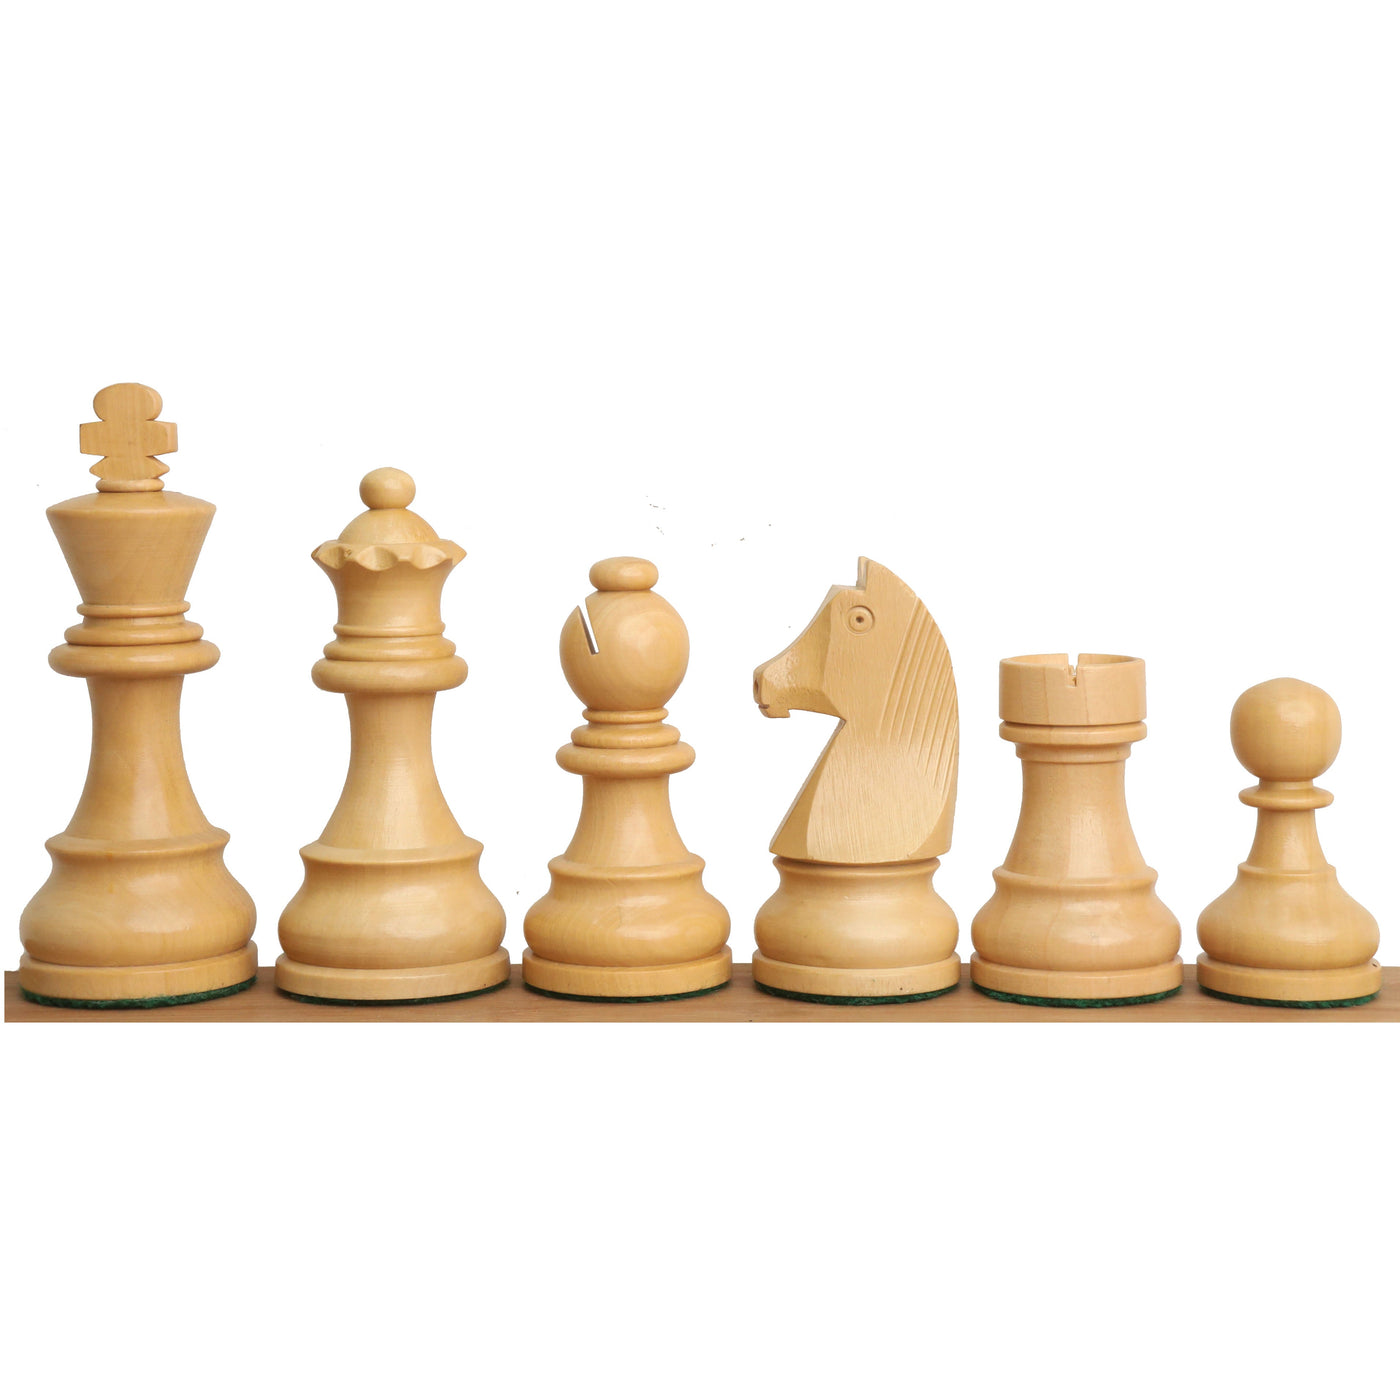 3.9" Tournament Chess Set - Chess Pieces Only in Ebonised Weighted wood with Extra Queens